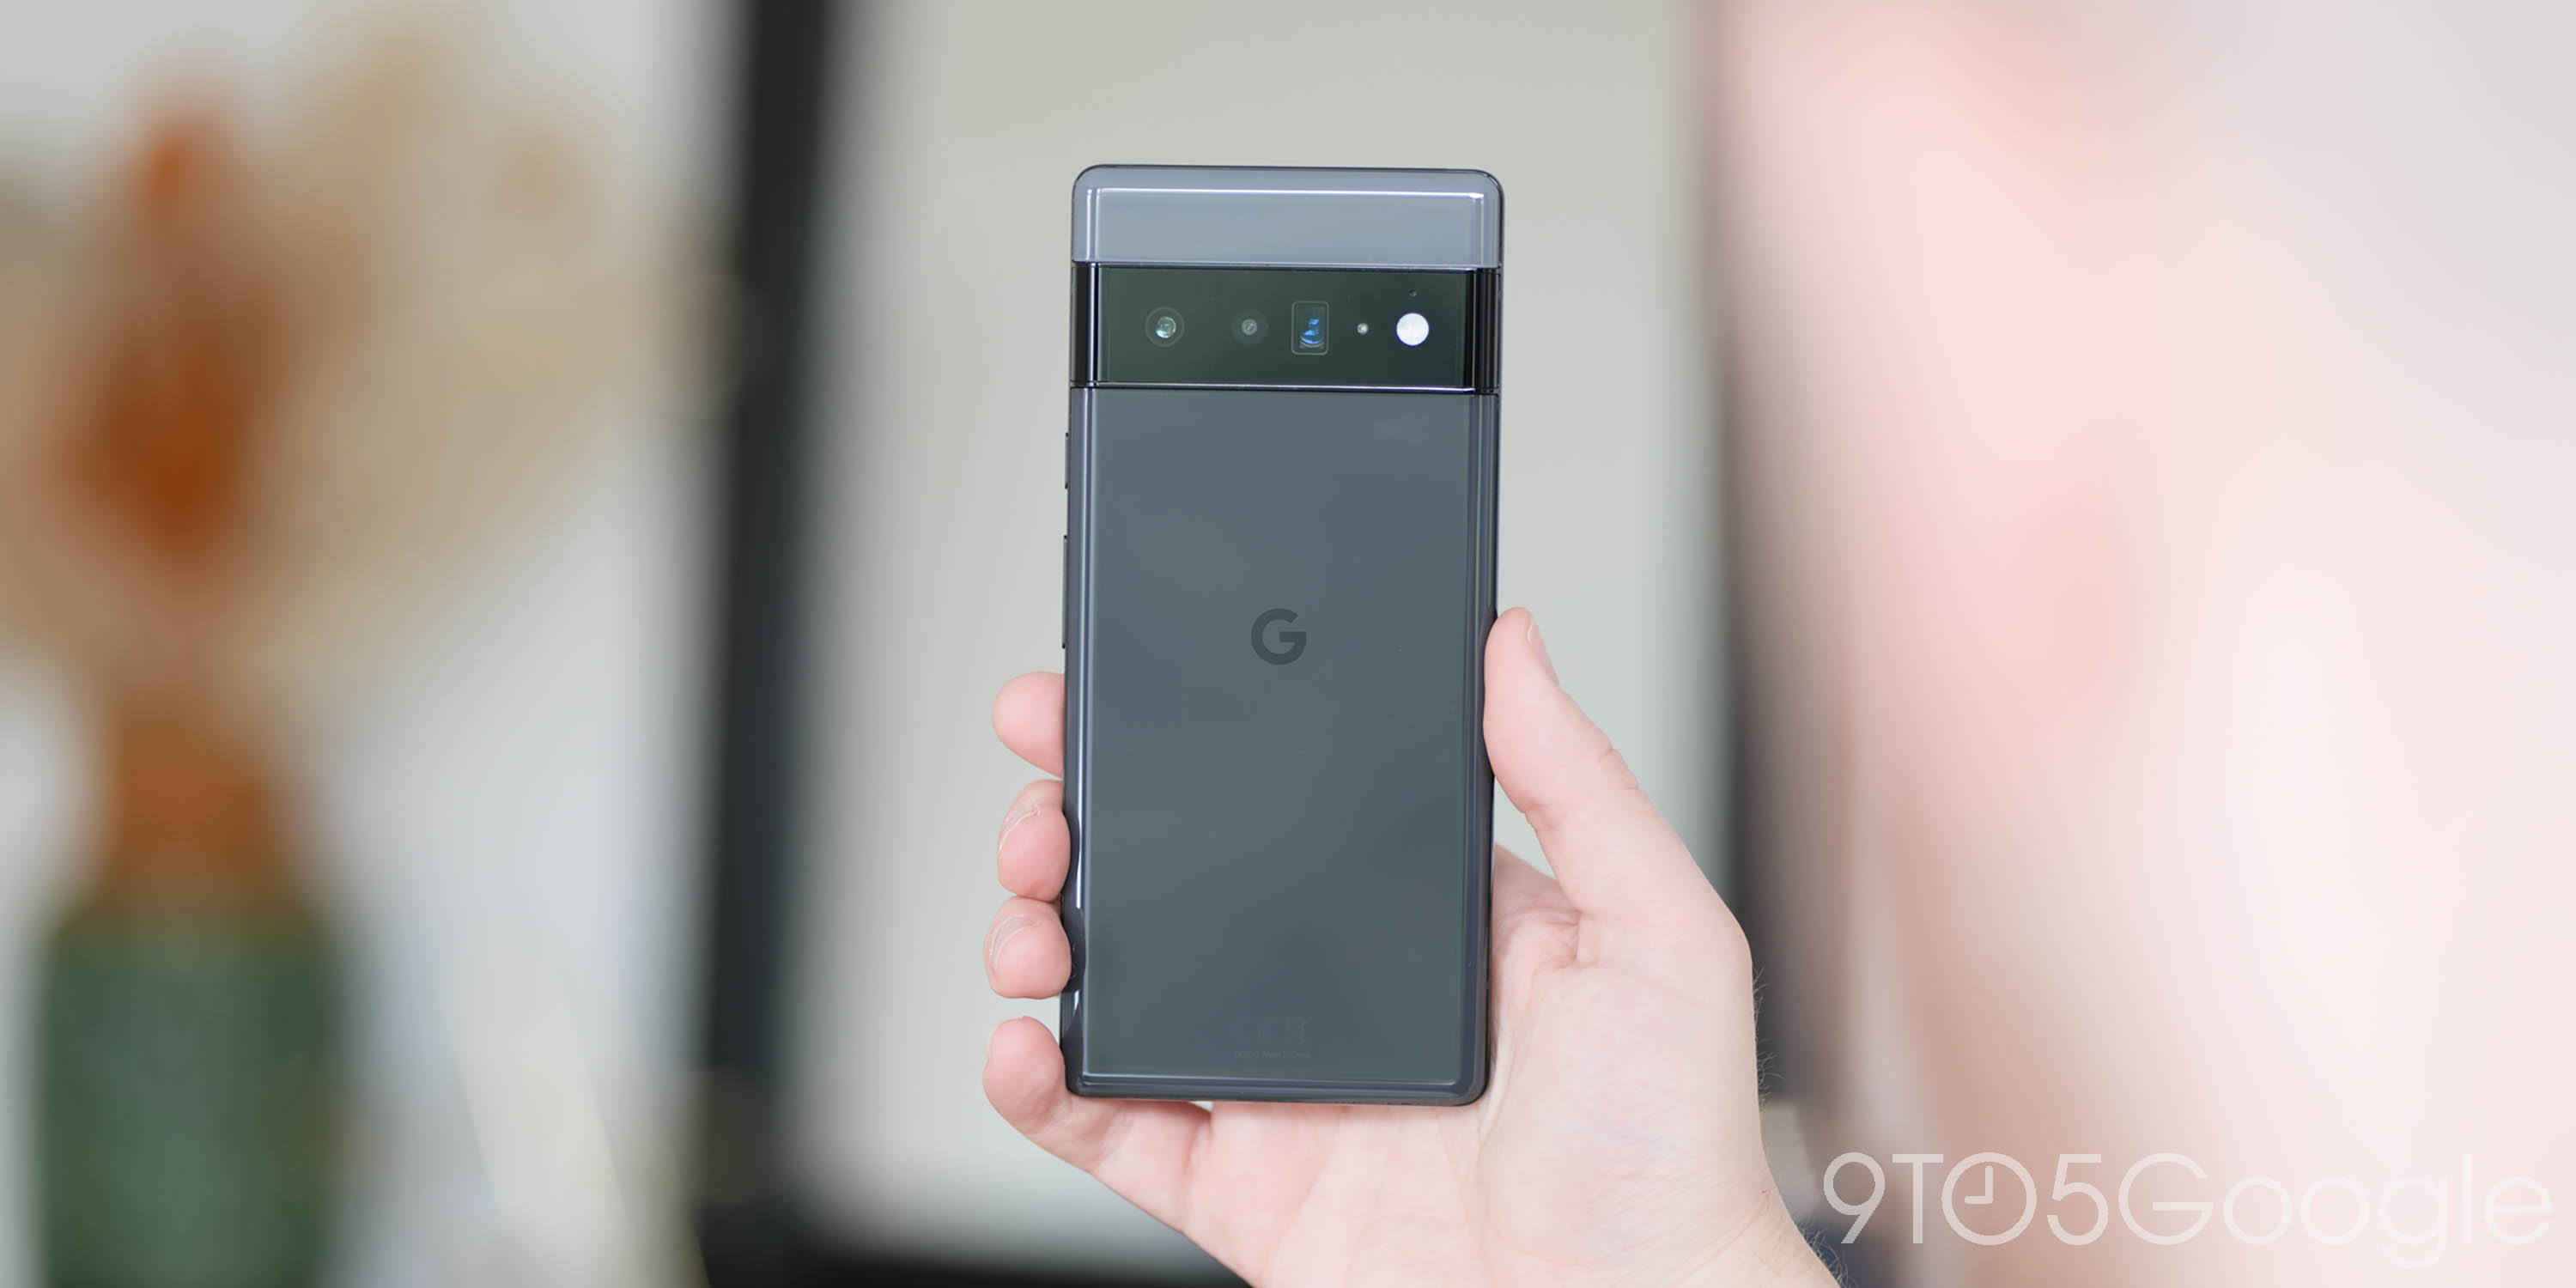 Pixel 6 Pro long term review: Still living up to expectations? - 9to5Google